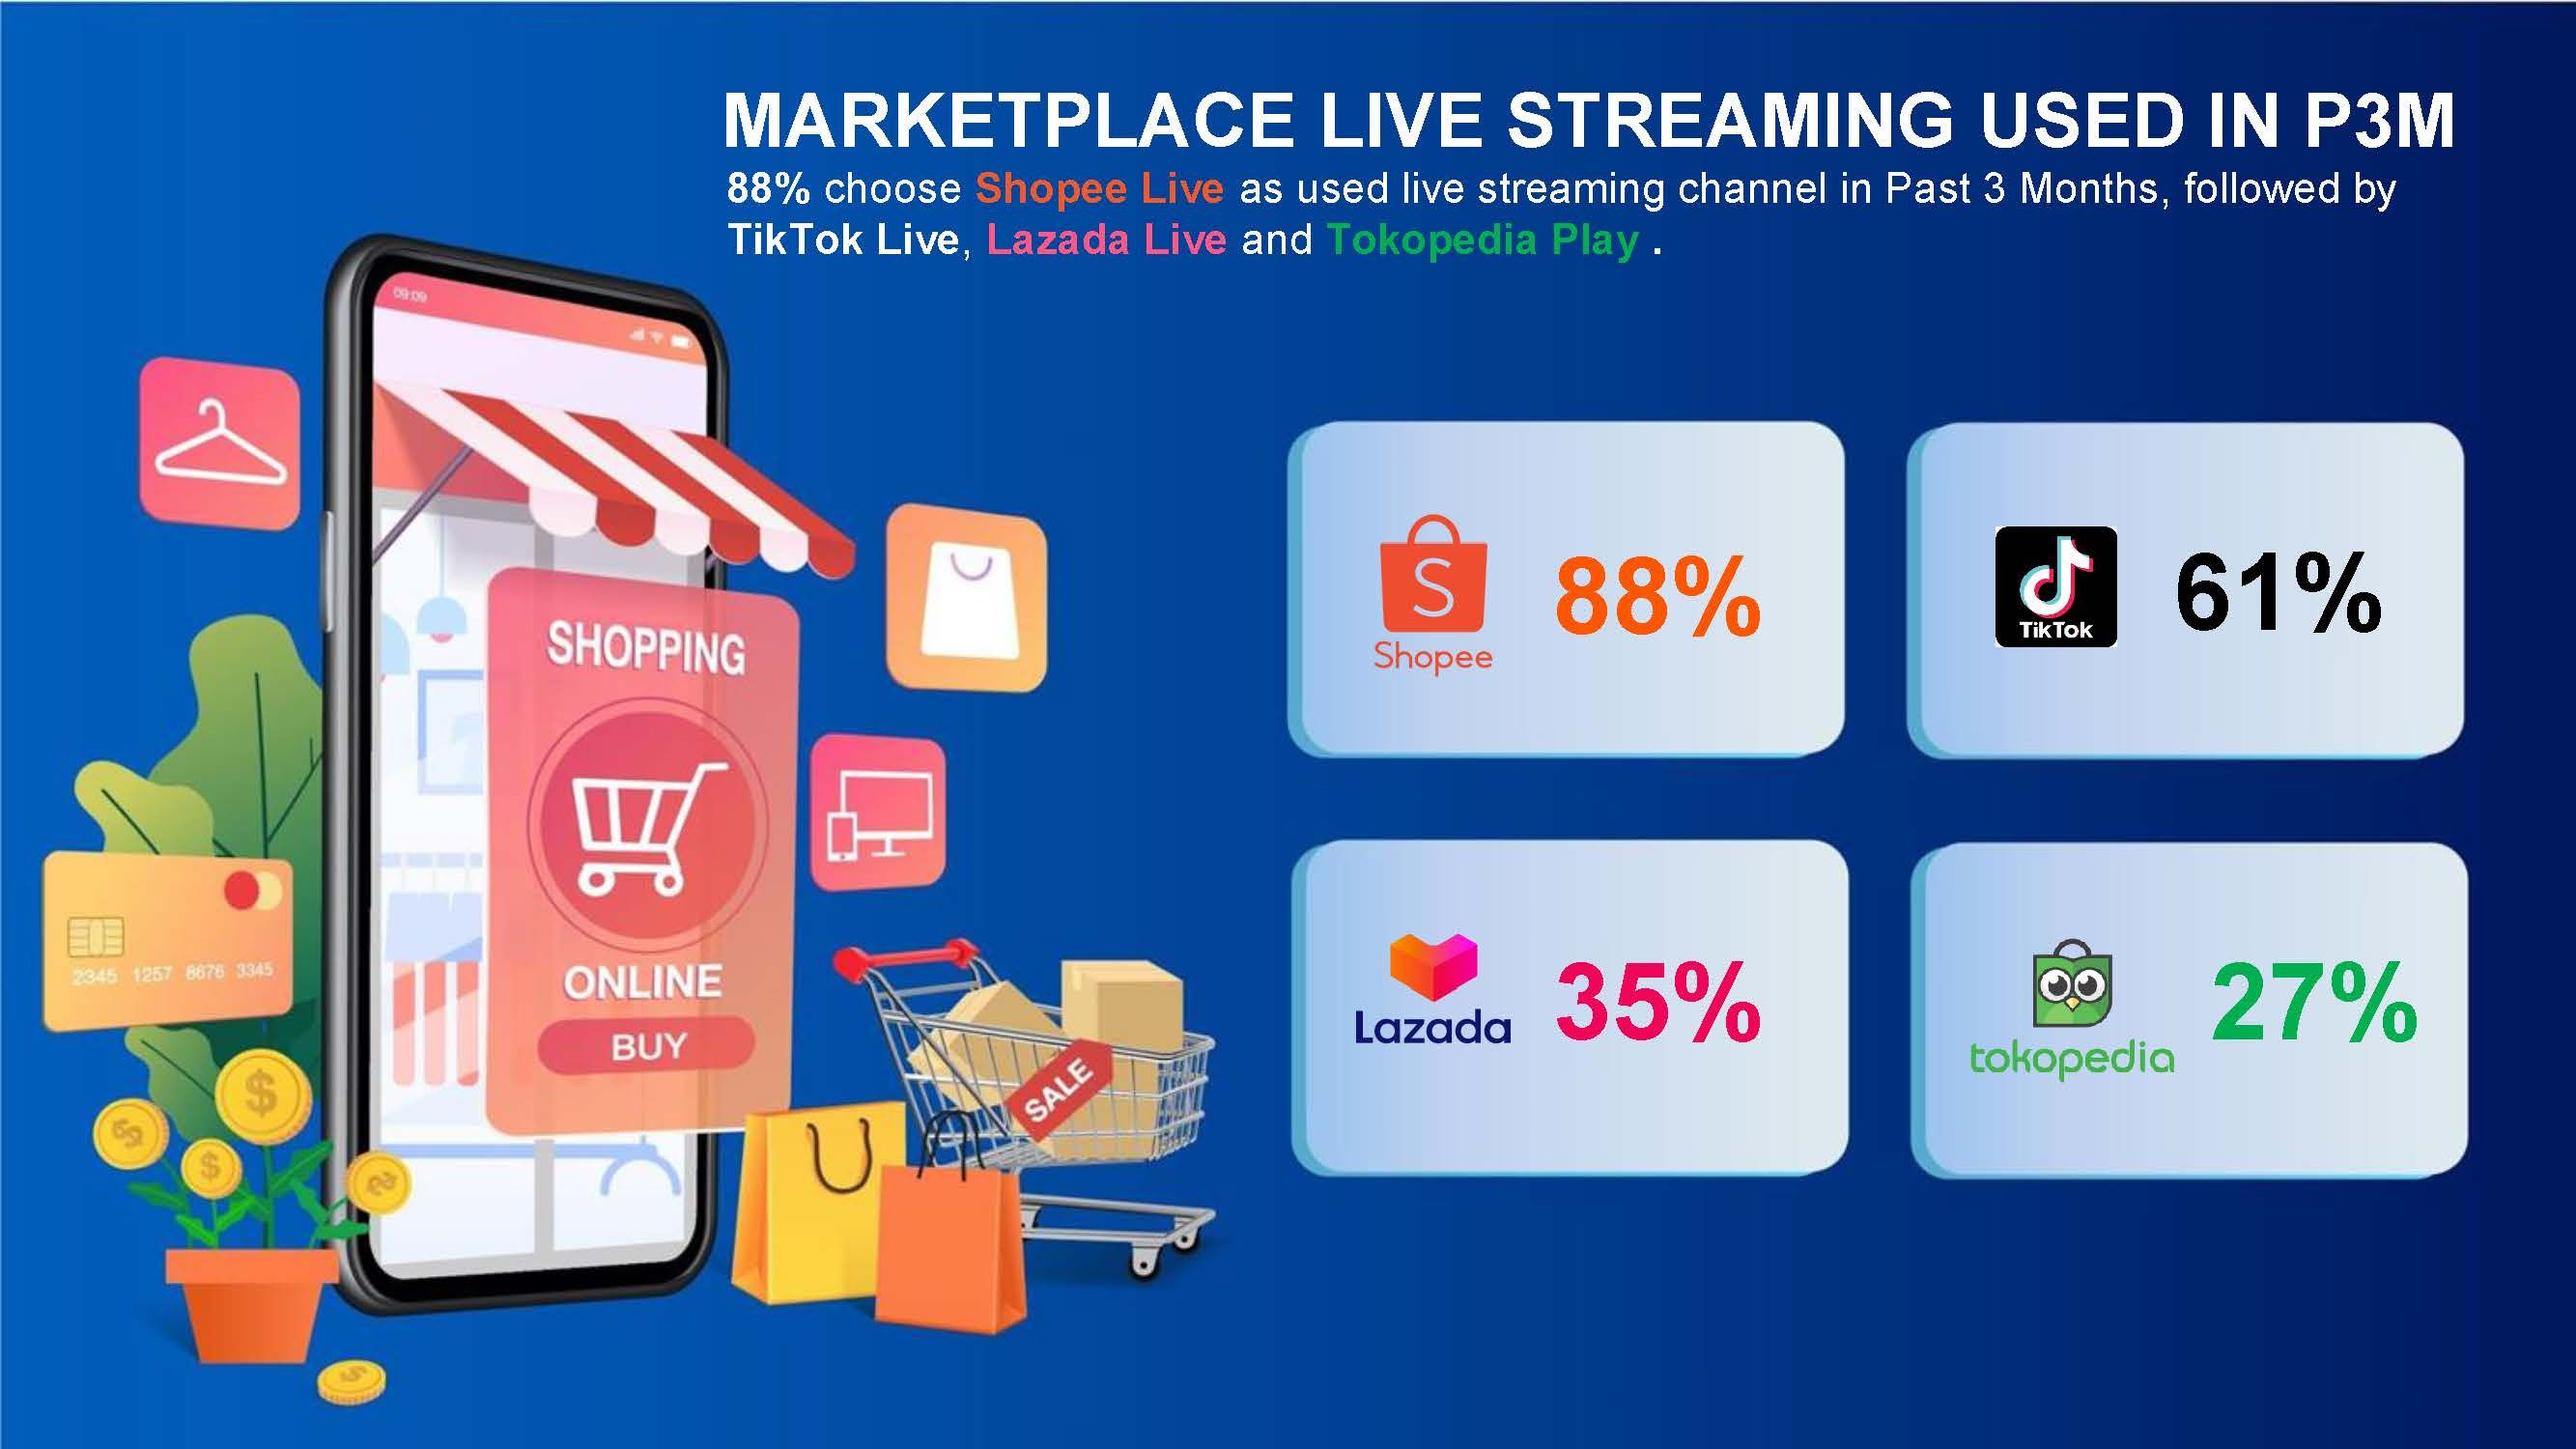 Marketplace Live Streaming used in P3M.